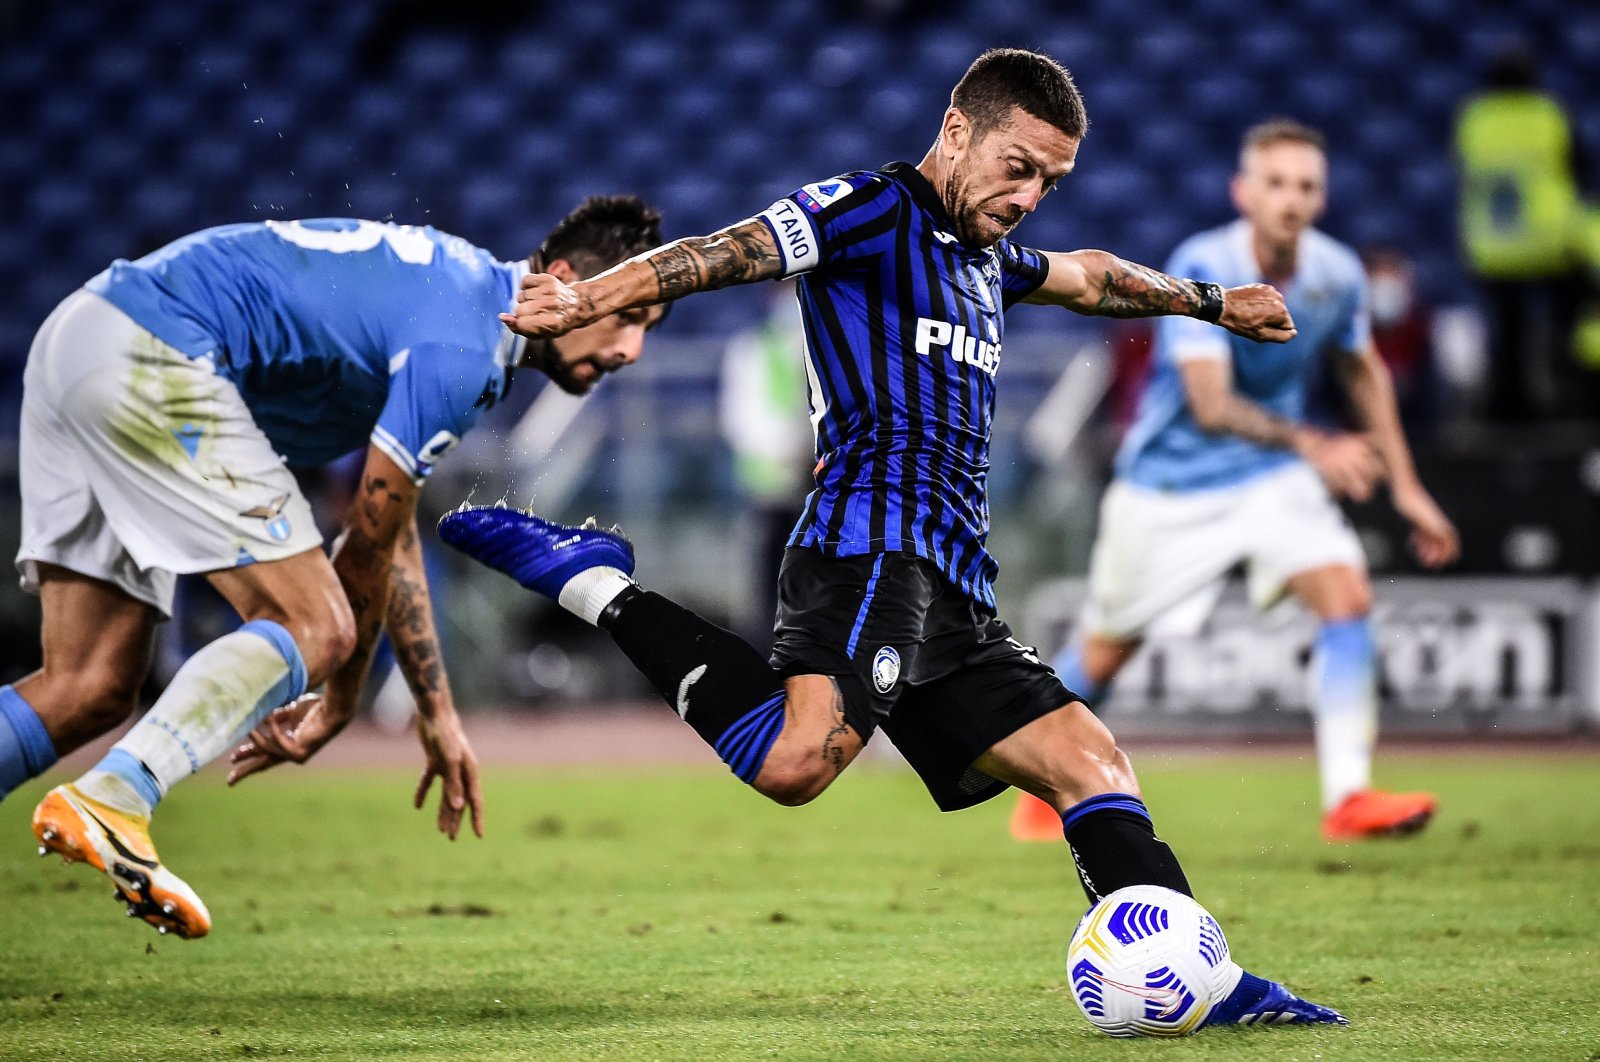 Atalanta's Alejandro Gomez (C) takes a shot during the Serie A match against Lazio, in Rome, Italy, Sept. 30, 2020. (AP Photo)